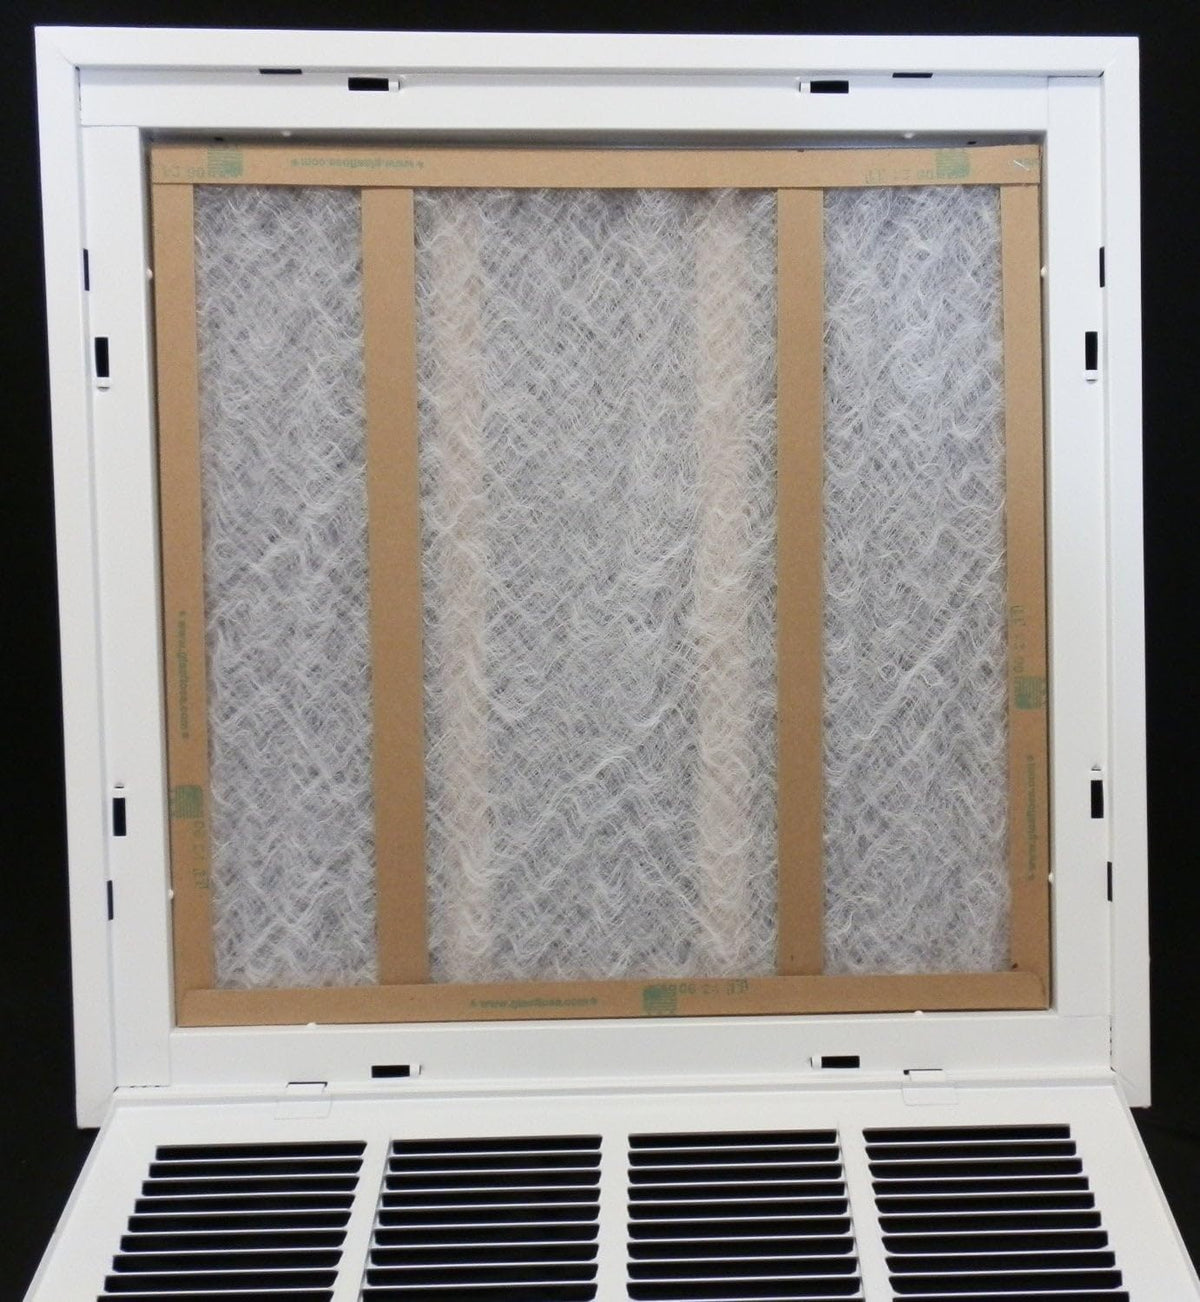 22&quot; X 12&quot; Steel Return Air Filter Grille for 1&quot; Filter - Removable Frame - [Outer Dimensions: 24 5/8&quot; X 14 5/8&quot;]